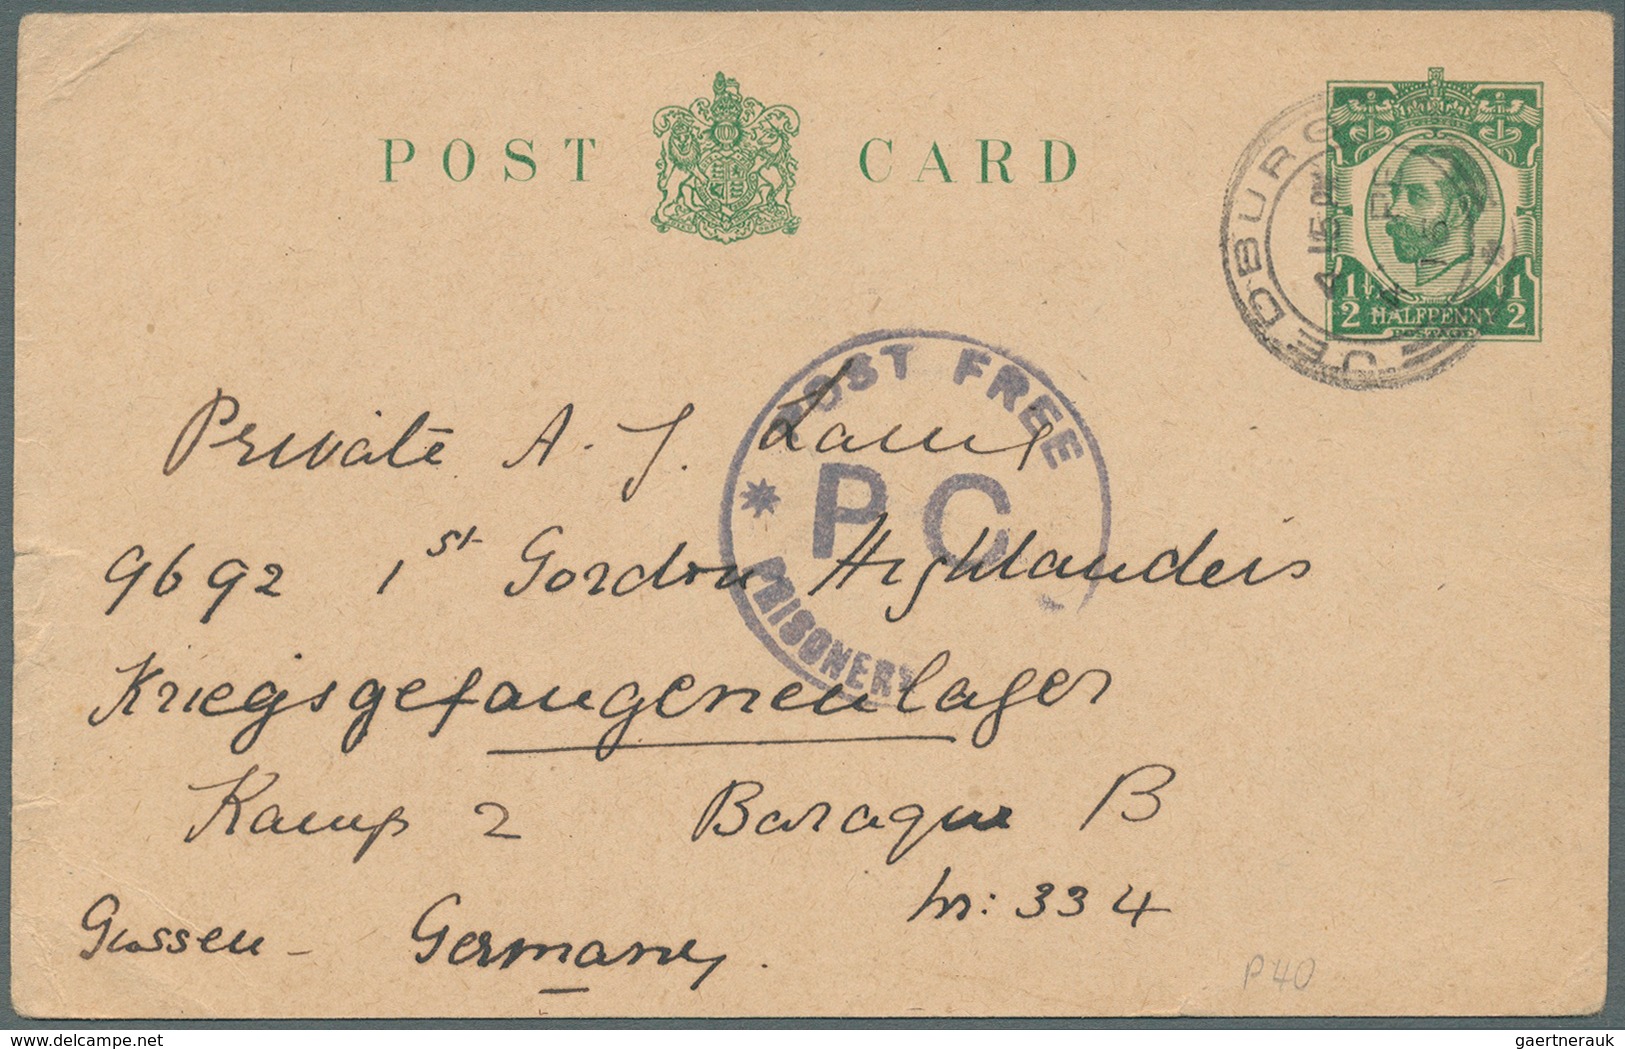 26720 Großbritannien: 1915/1945, 318 POW letters and card from WW 1 and 2 in nice variety of camps with in